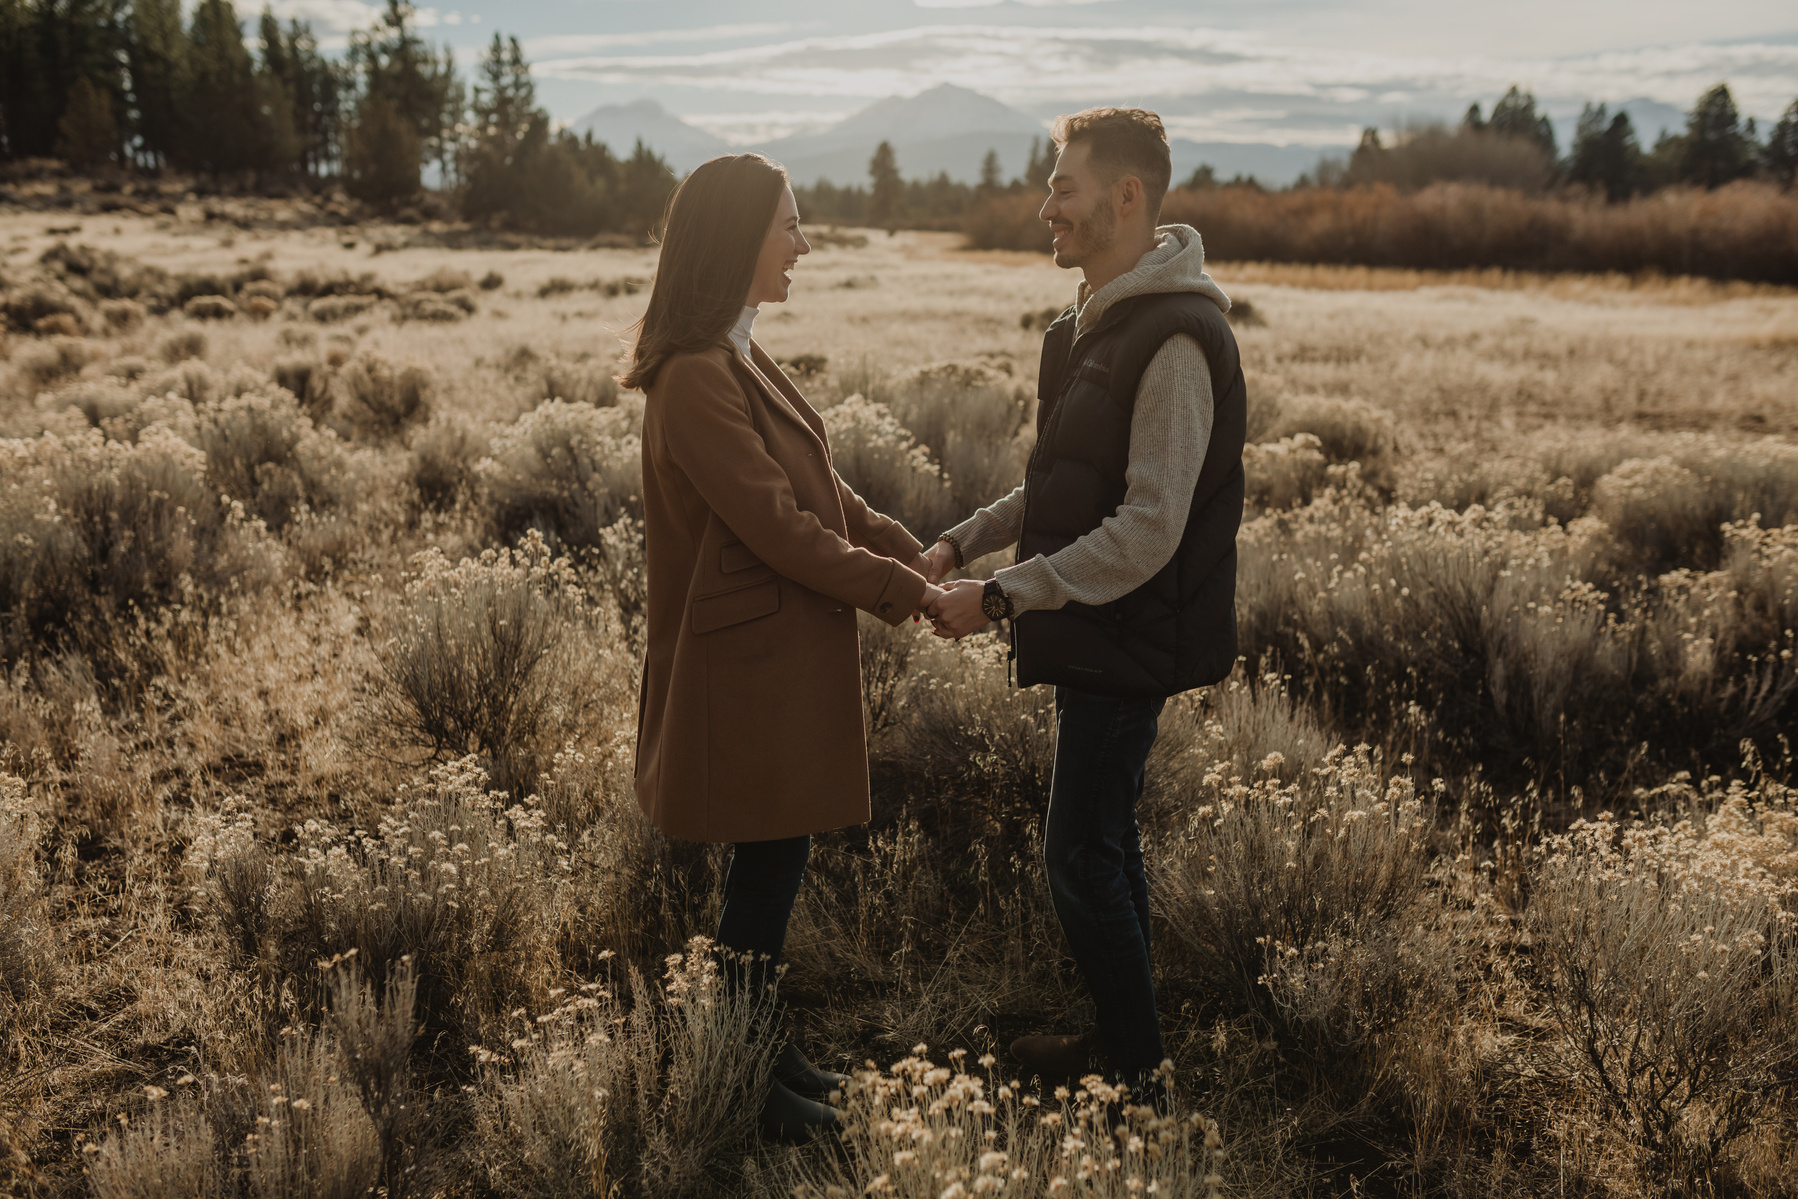 Engagement photo session in Bend, Oregon